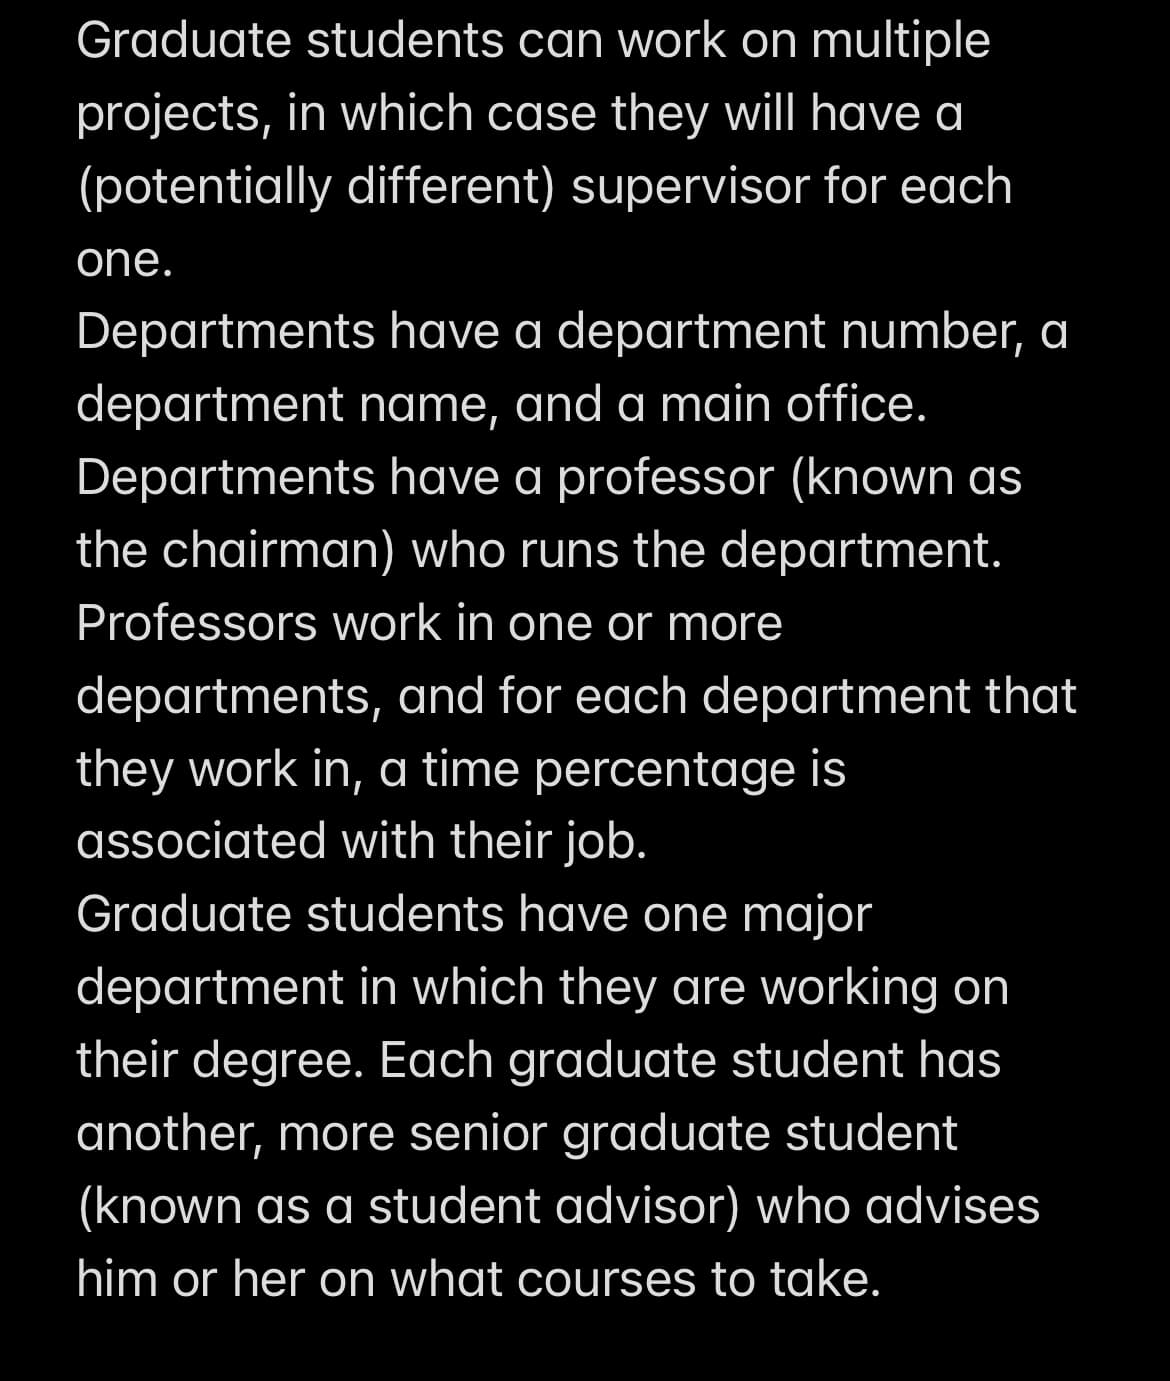 Graduate students can work on multiple
projects, in which case they will have a
(potentially different) supervisor for each
one.
Departments have a department number, a
department name, and a main office.
Departments have a professor (known as
the chairman) who runs the department.
Professors work in one or more
departments, and for each department that
they work in, a time percentage is
associated with their job.
Graduate students have one major
department in which they are working on
their degree. Each graduate student has
another, more senior graduate student
(known as a student advisor) who advises
him or her on what courses to take.